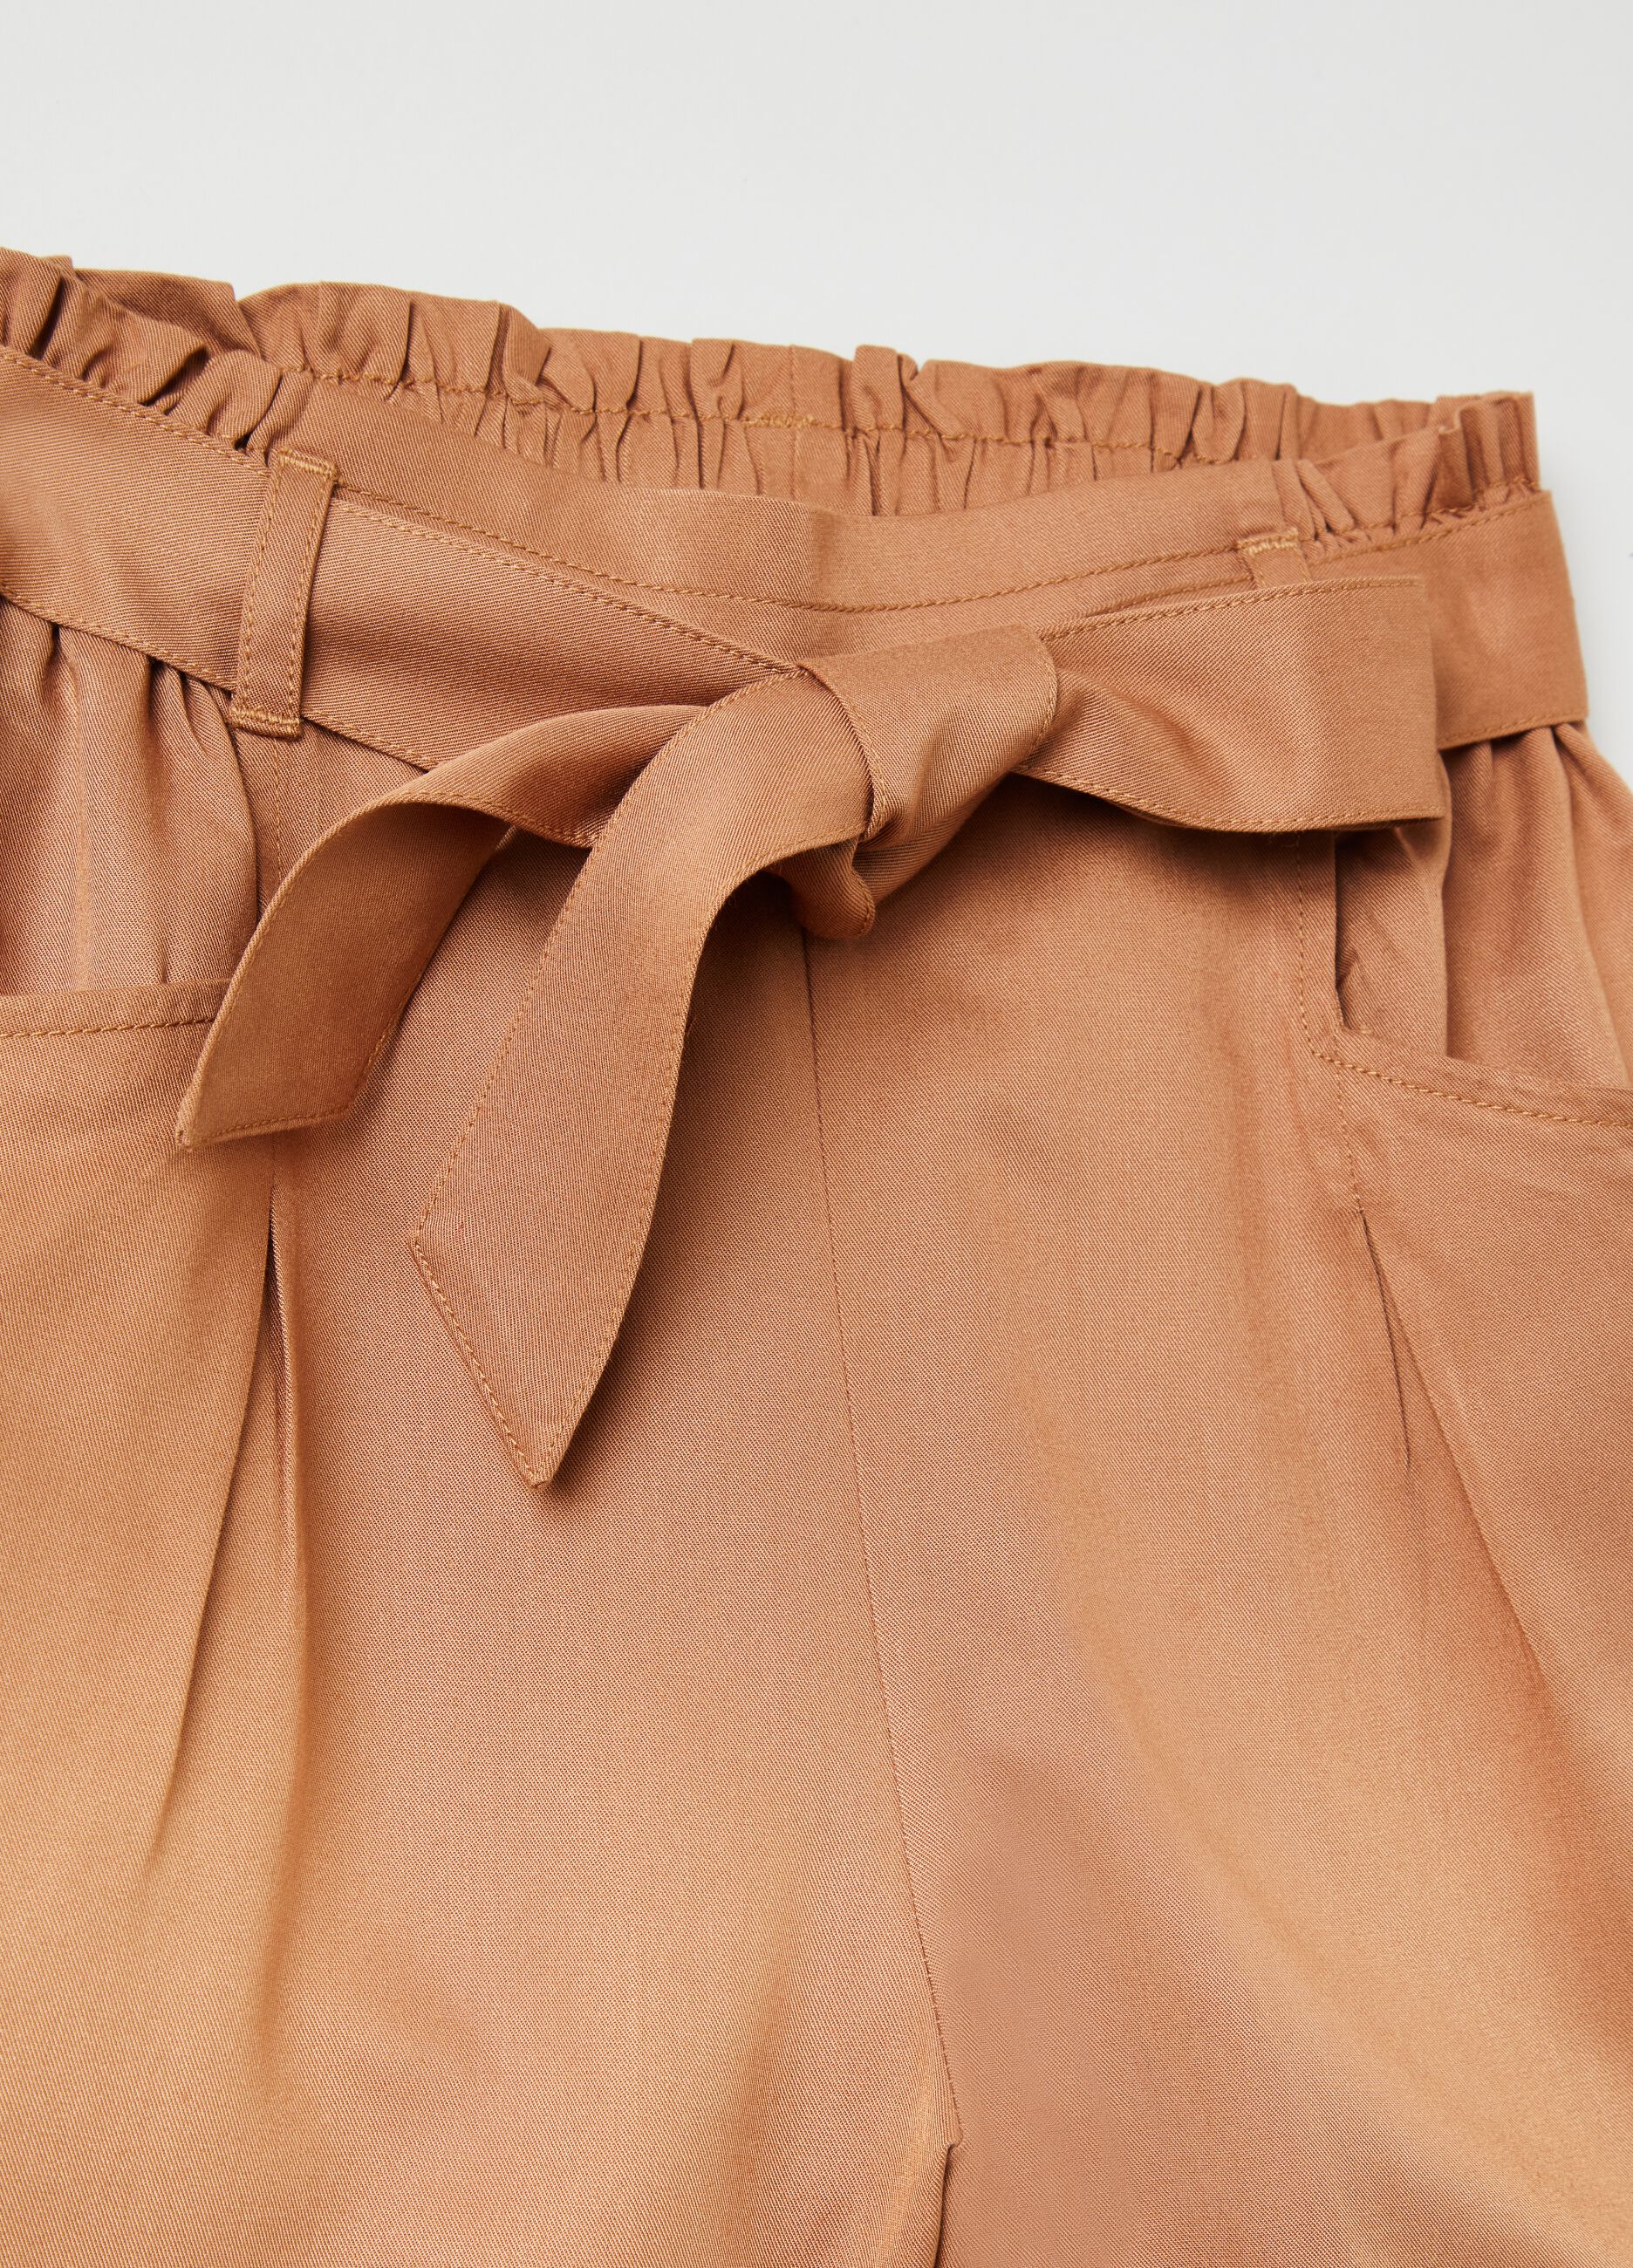 Shorts in viscose with belt